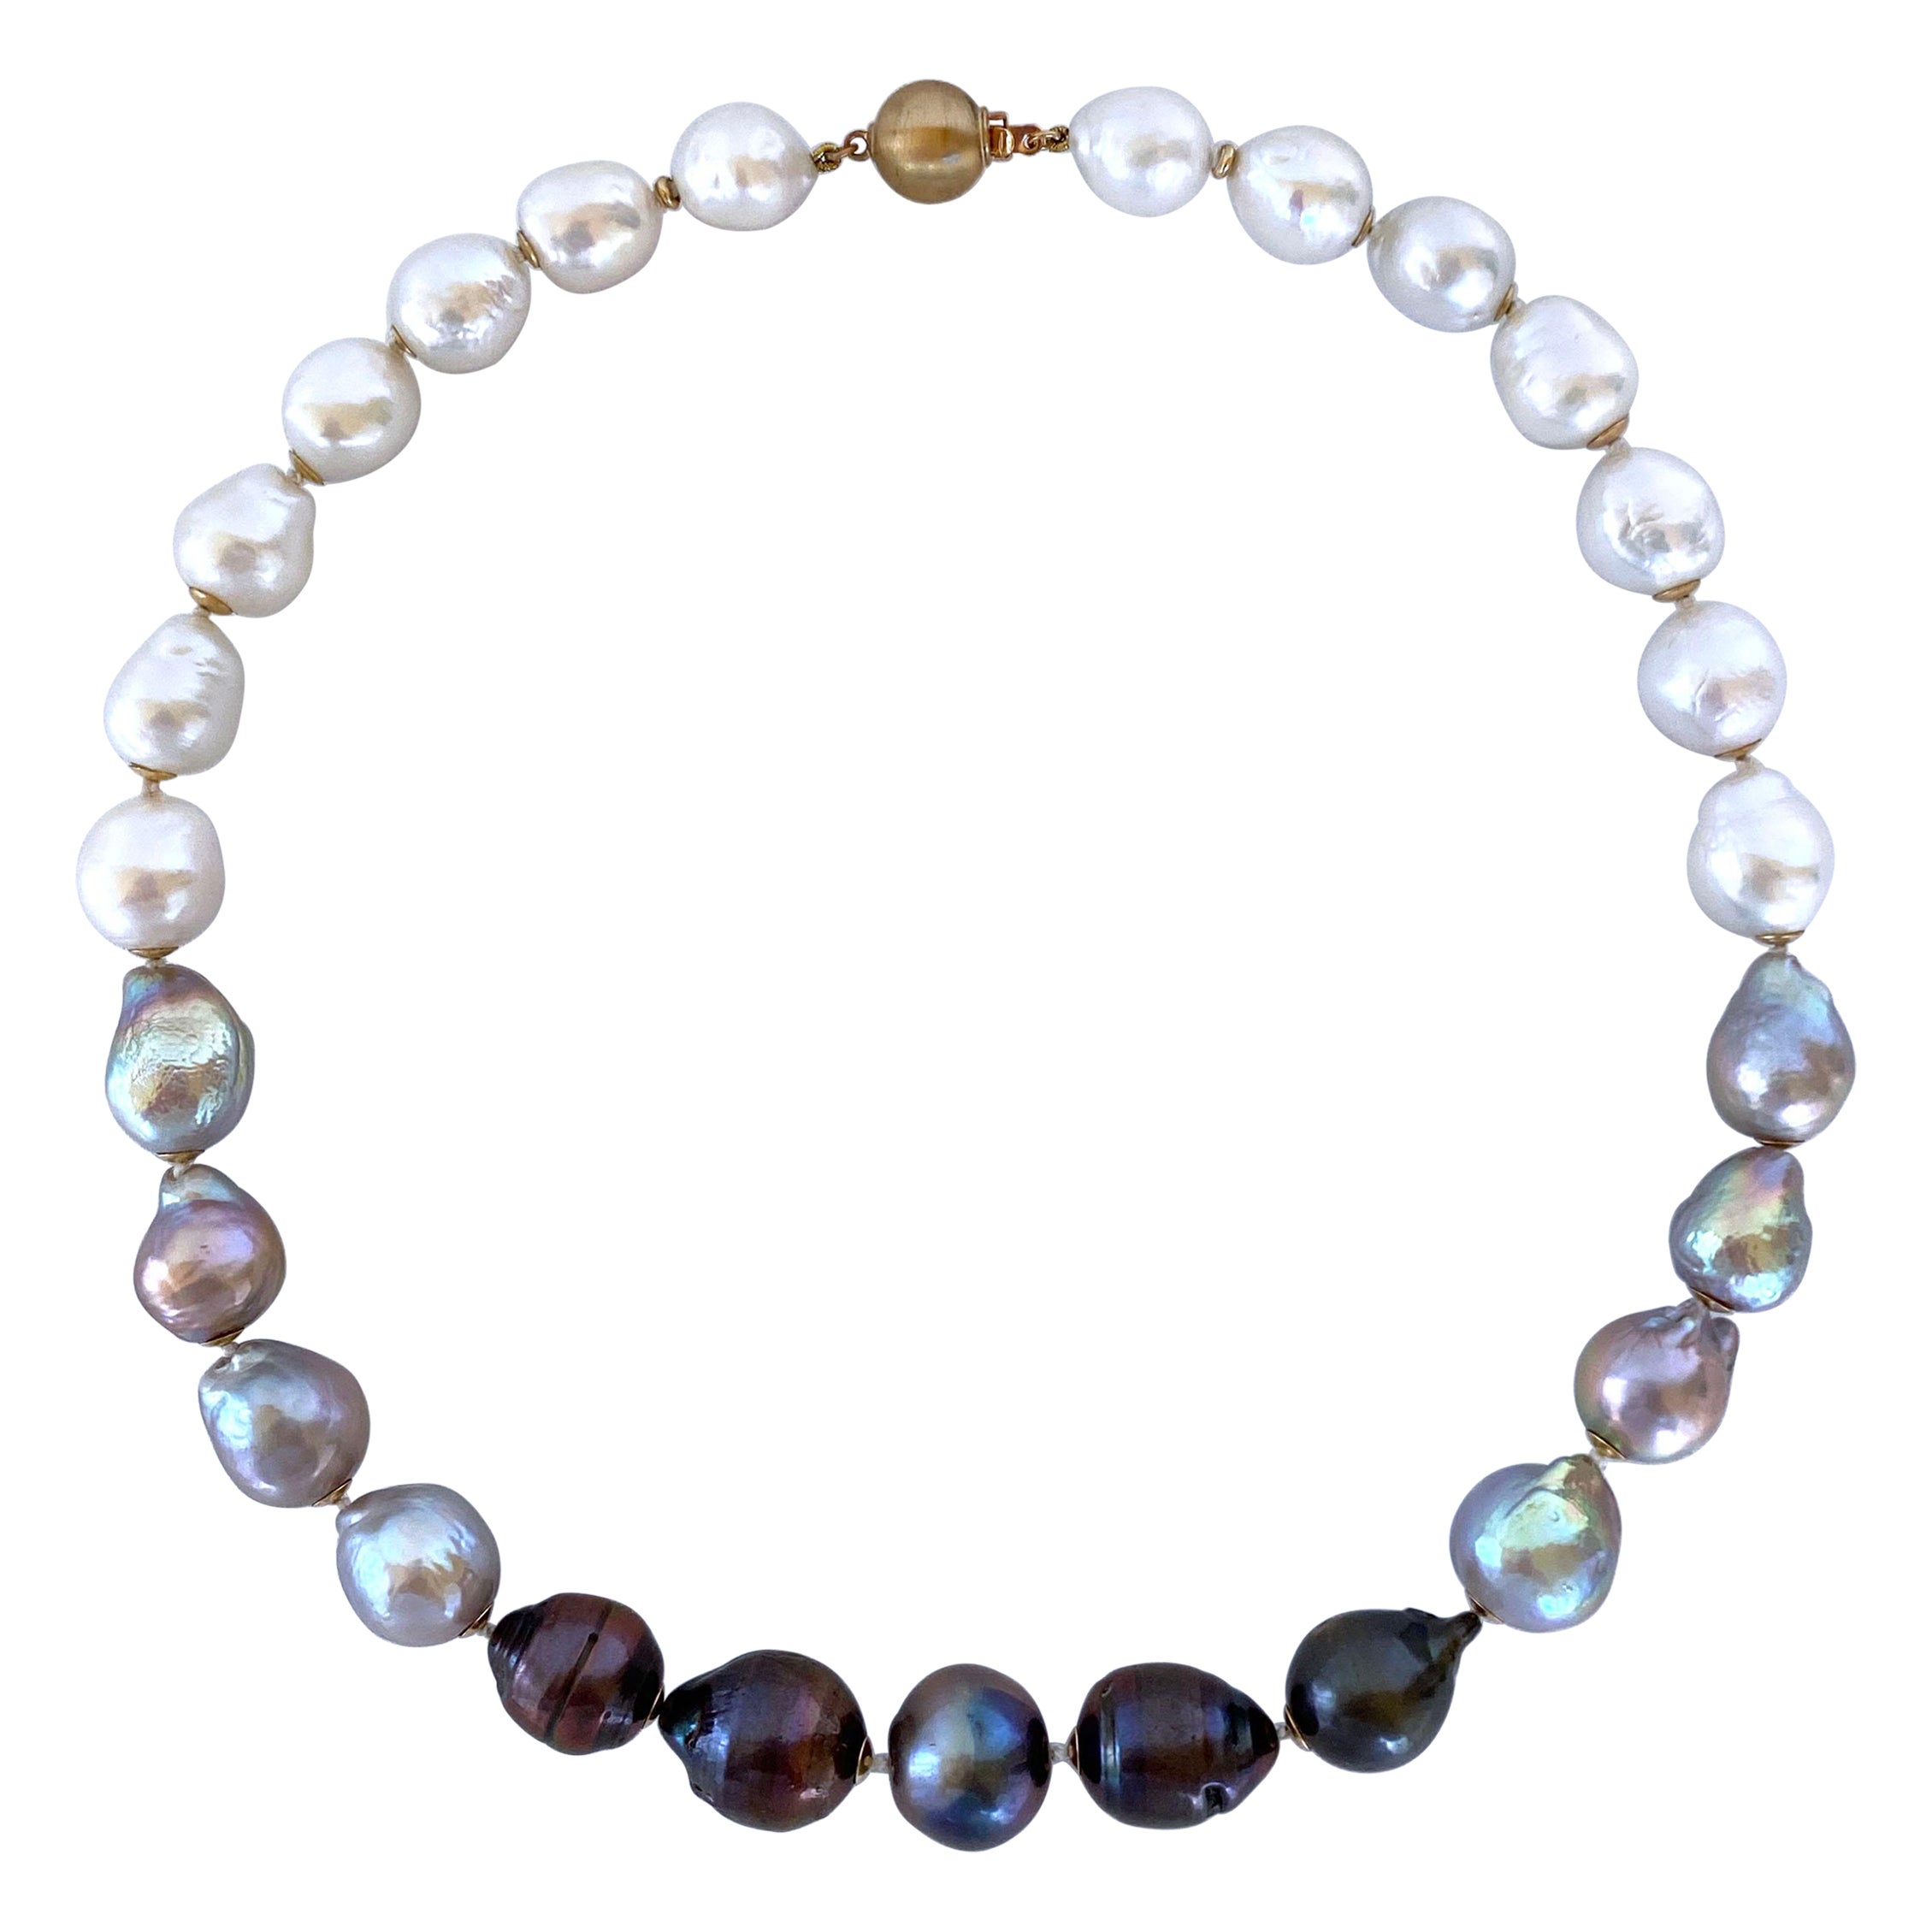 Marina J. Black, White & Grey Graduated Ombre Pearl Necklace with 14K Gold Clasp